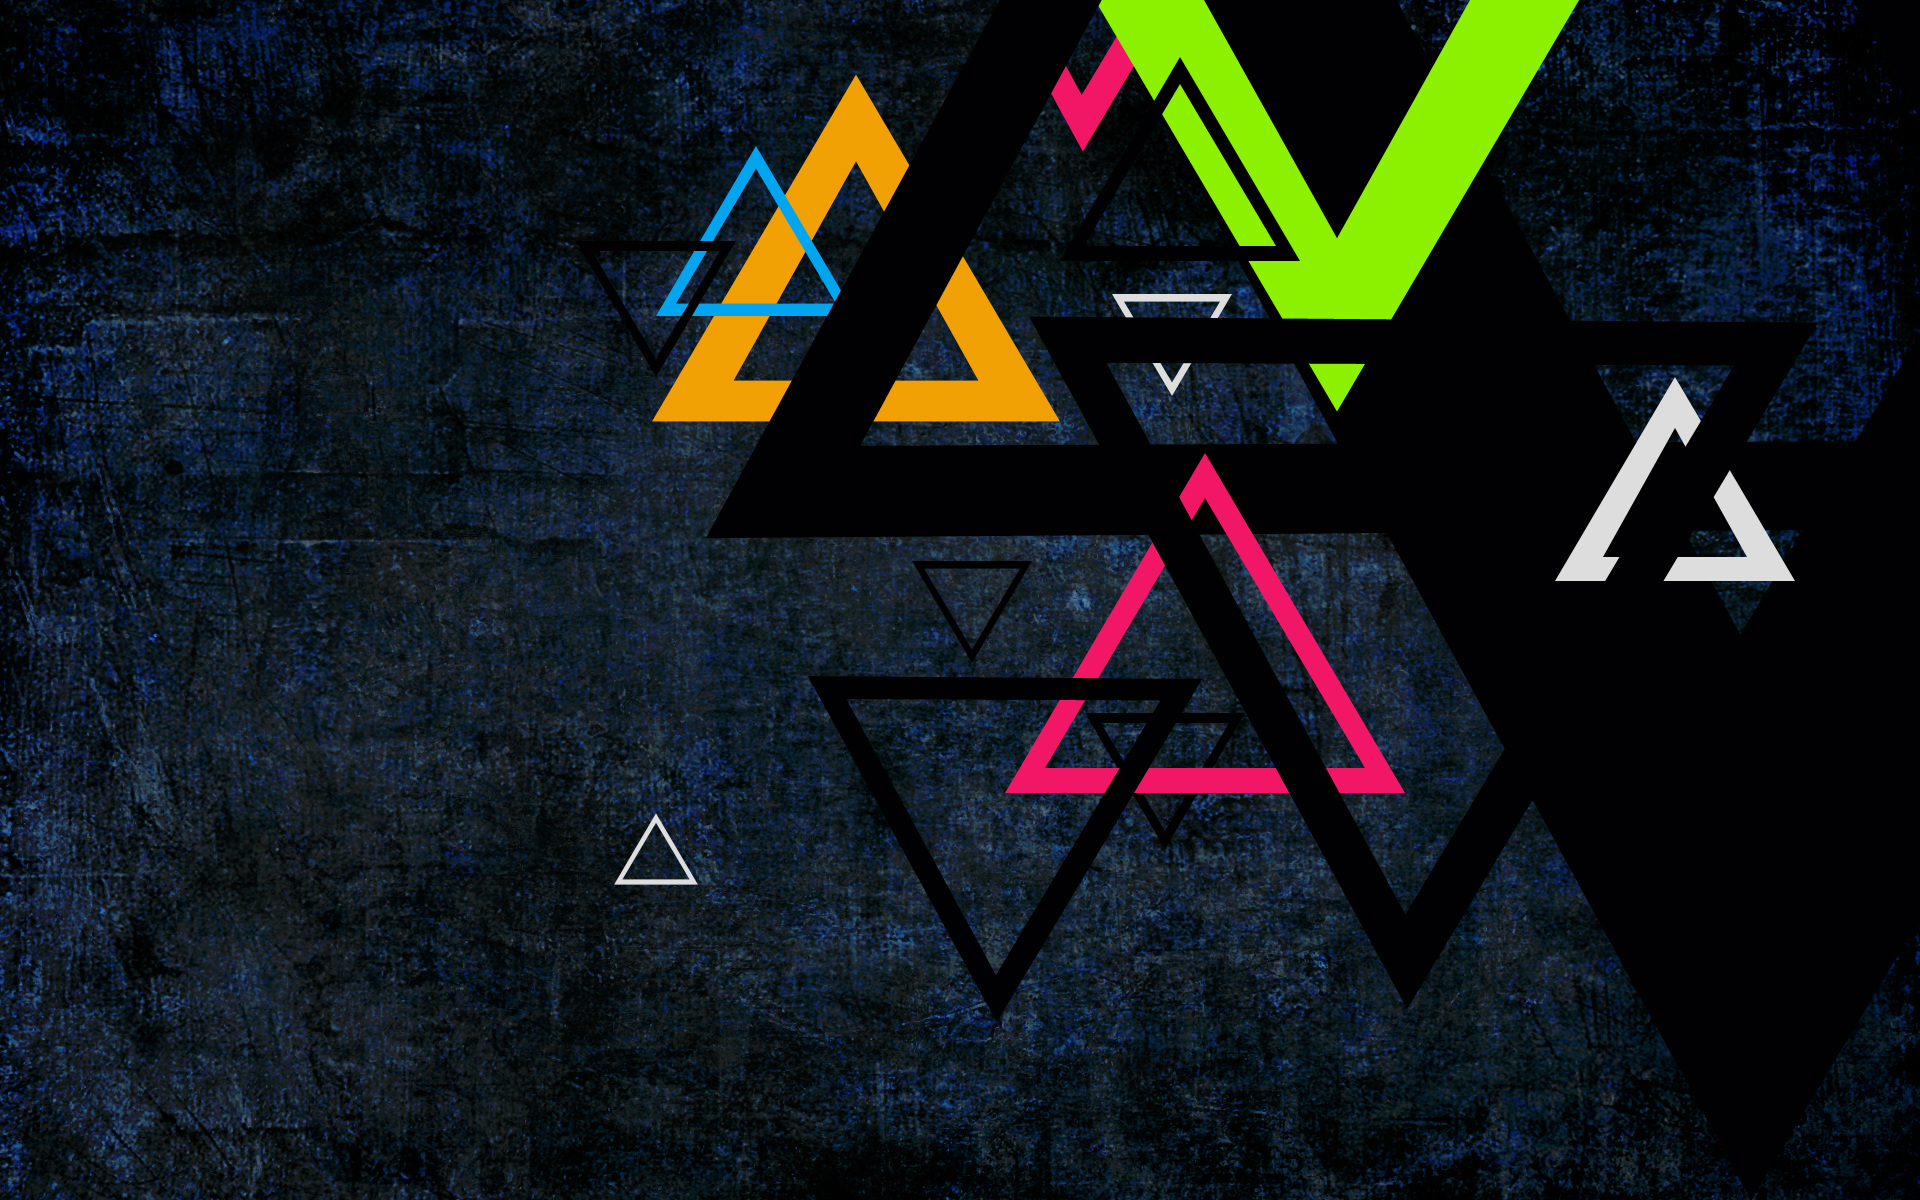 wallpaper_29_the_triangles_by_zp